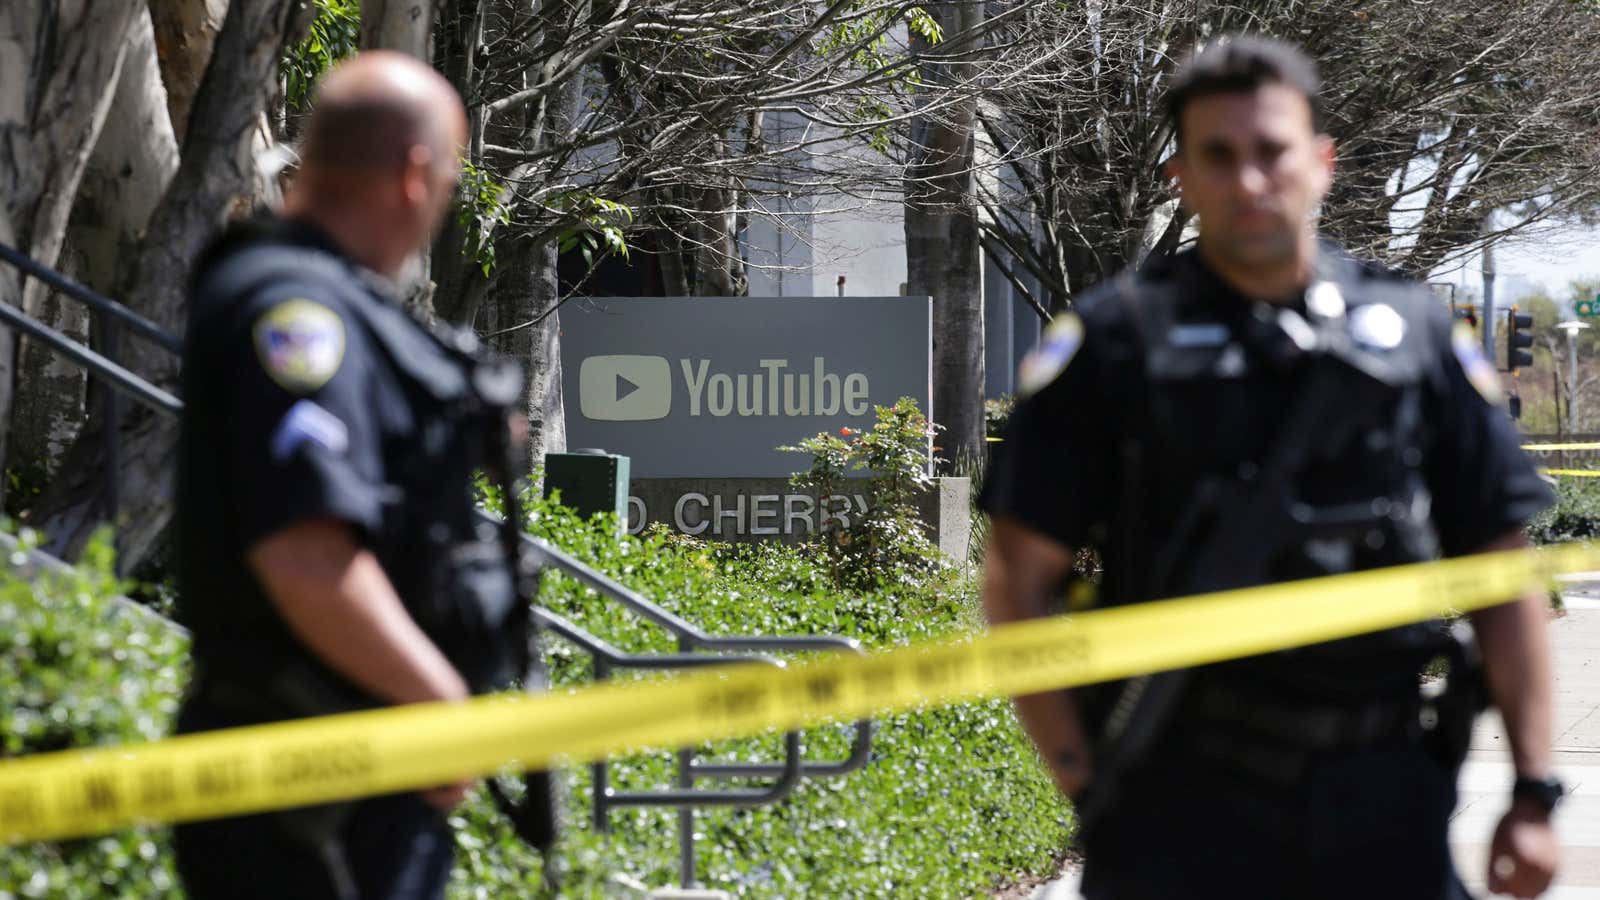 Police officers at the headquarters of YouTube, which faced an active shooter situation on Tuesday.